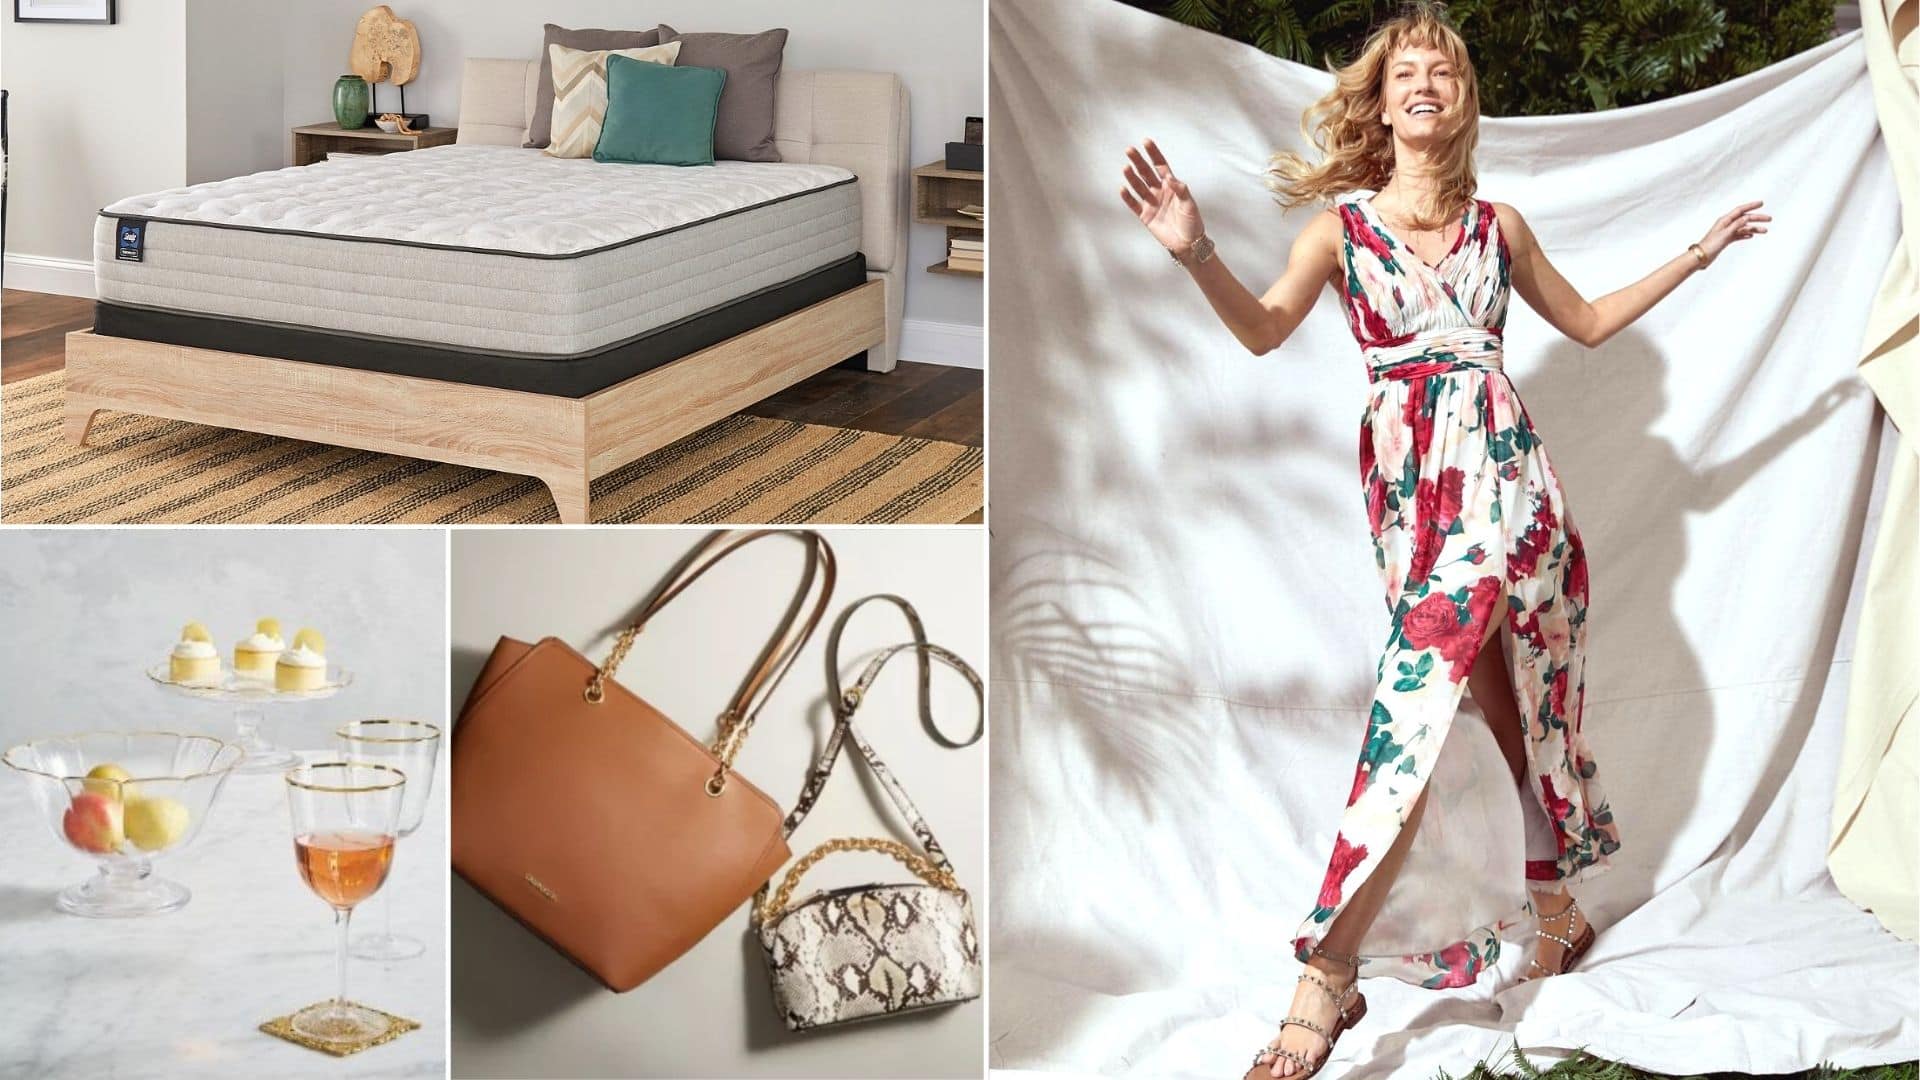 https://daily.slickdeals.net/wp-content/uploads/2021/05/Get-Up-to-70-Off-Select-Items-During-Macys-One-Day-Sale-hero.jpg